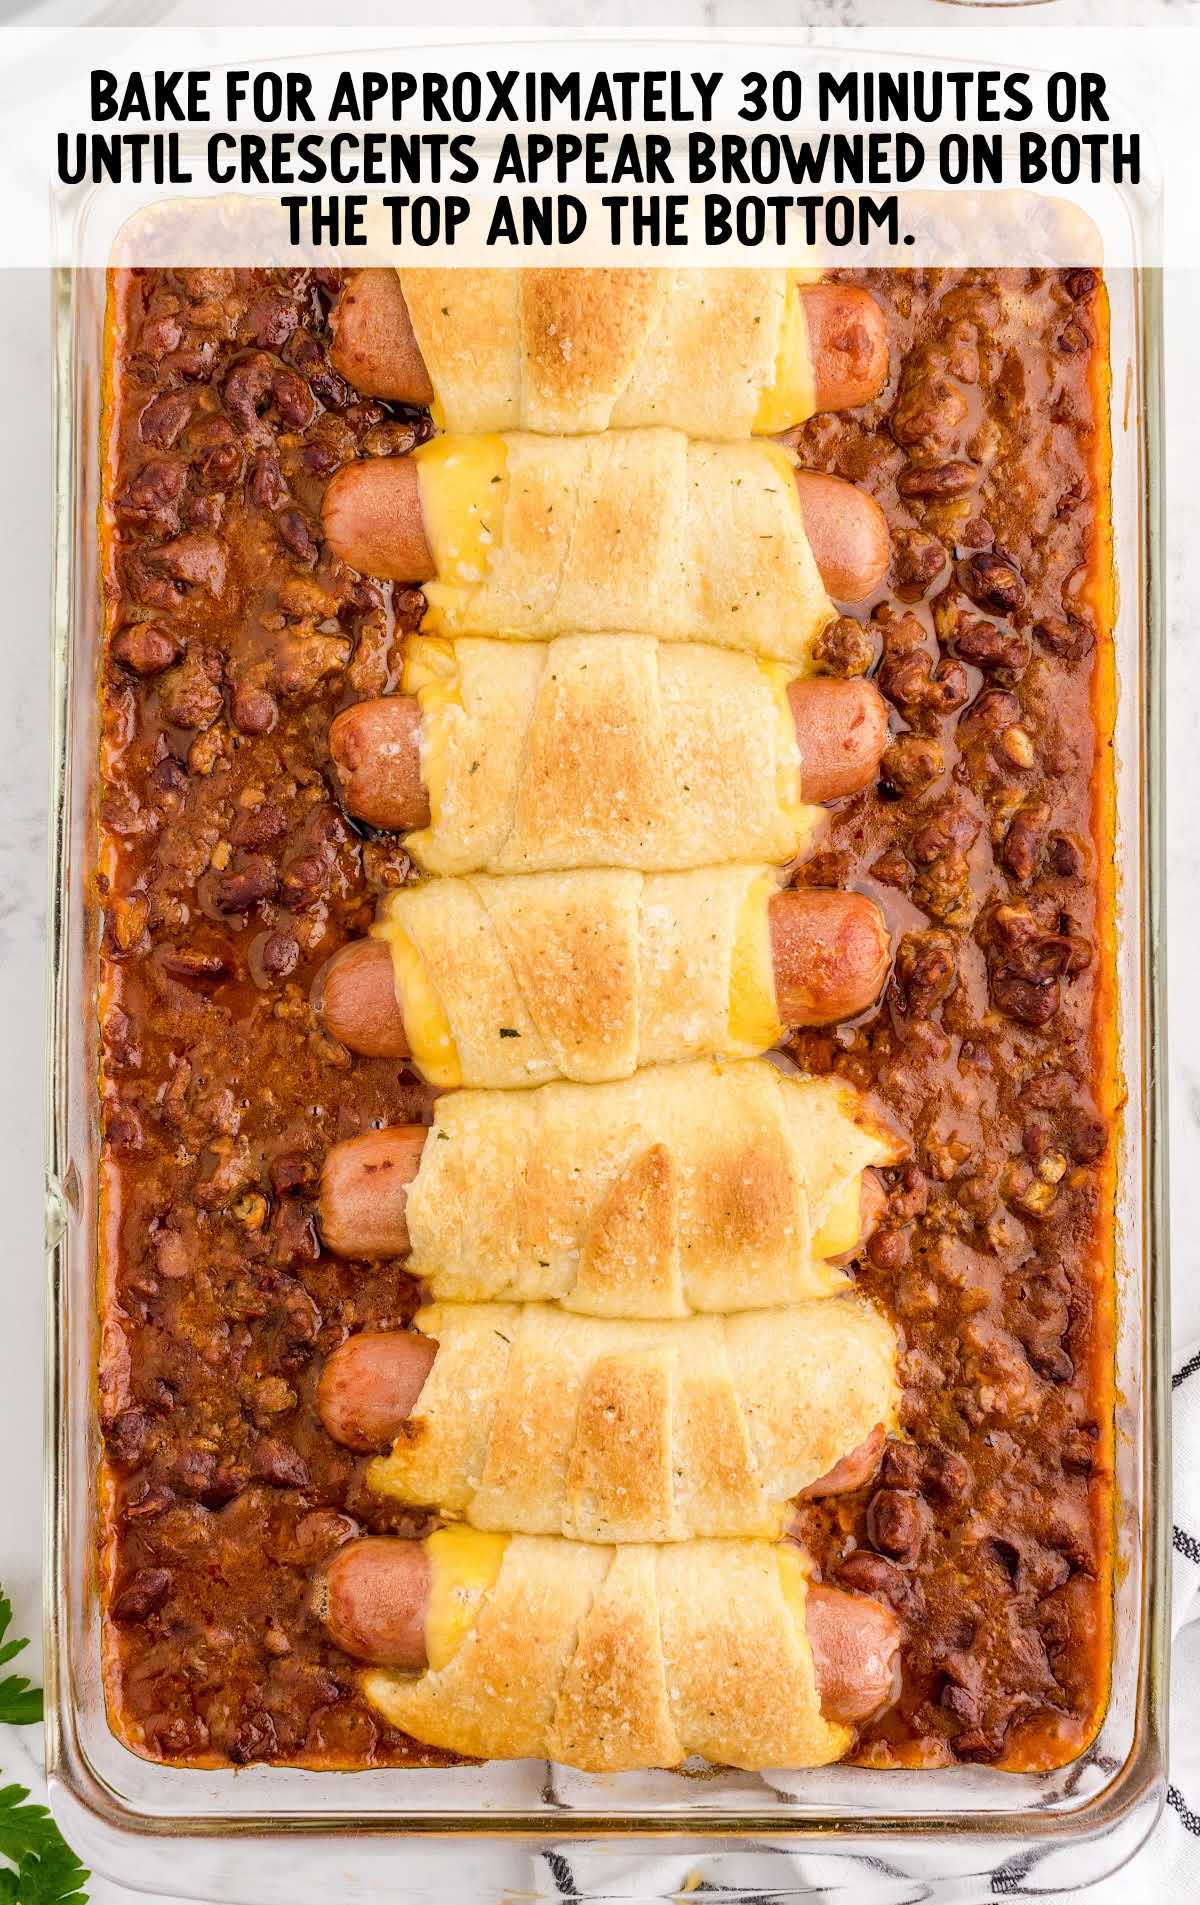 chili cheese dog bake is baked in a baking dish